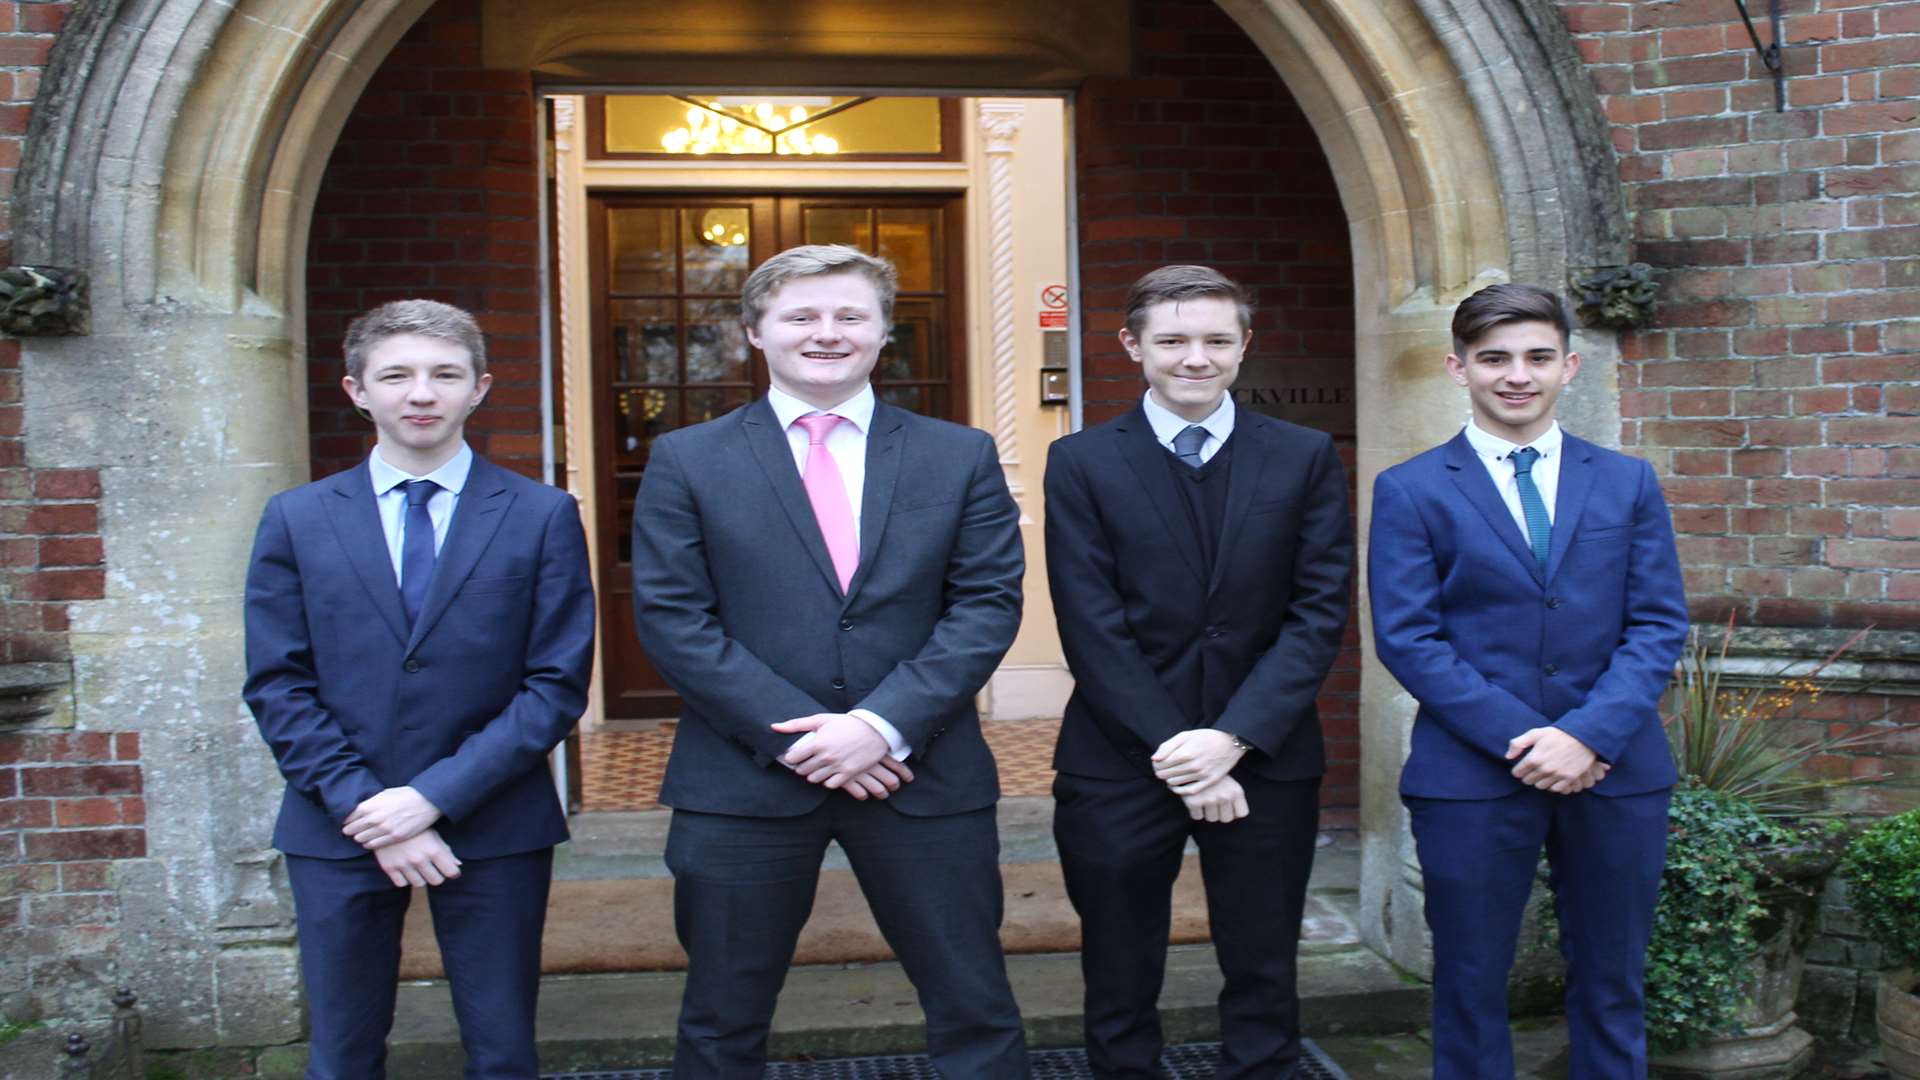 Team of A Level pupils from Sackville School in Hildenborough beat